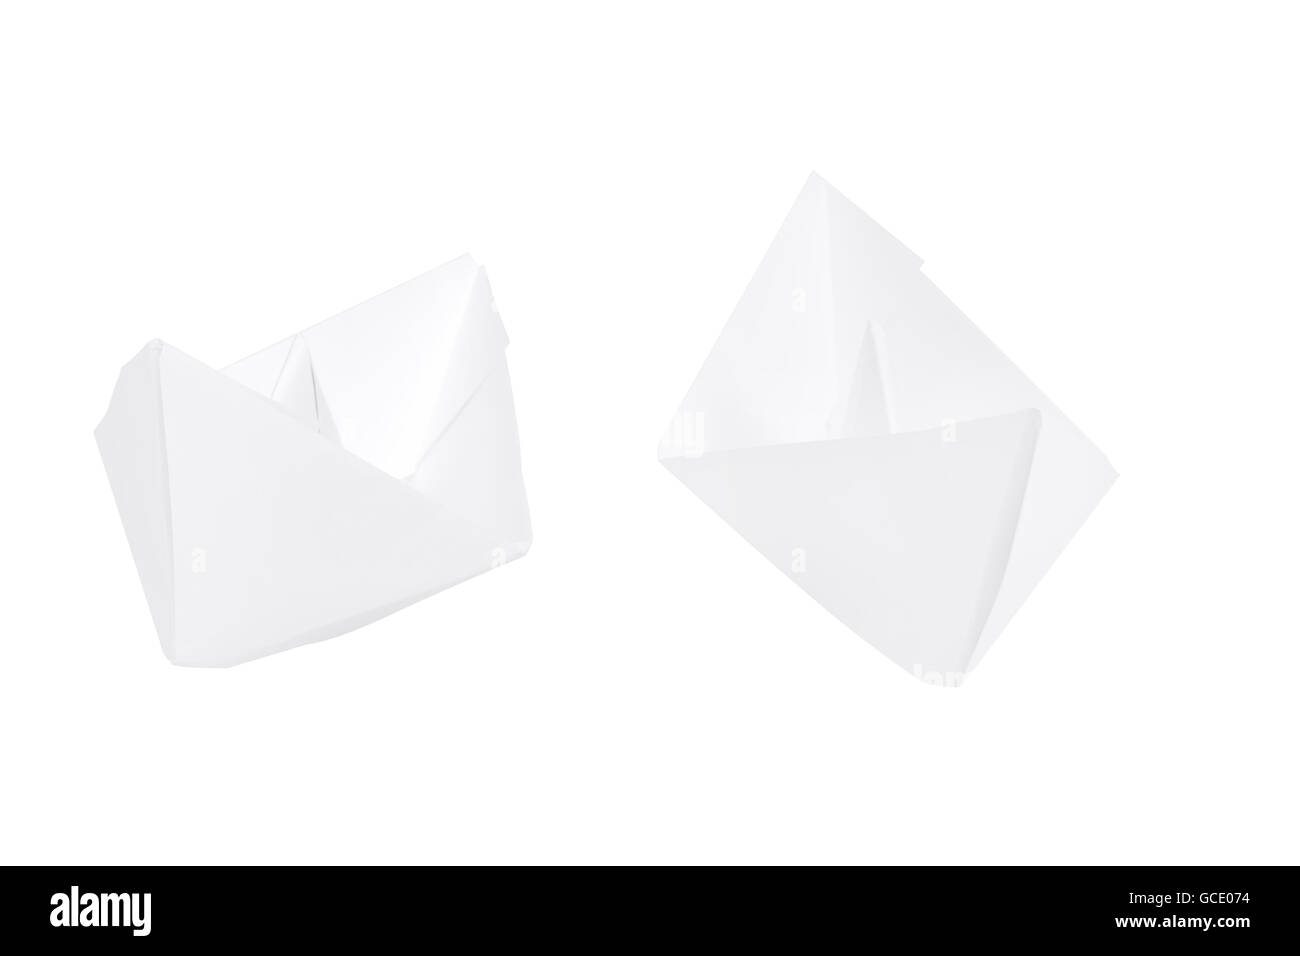 Paper boat isolated on white background. Paper fold boat. Stock Photo